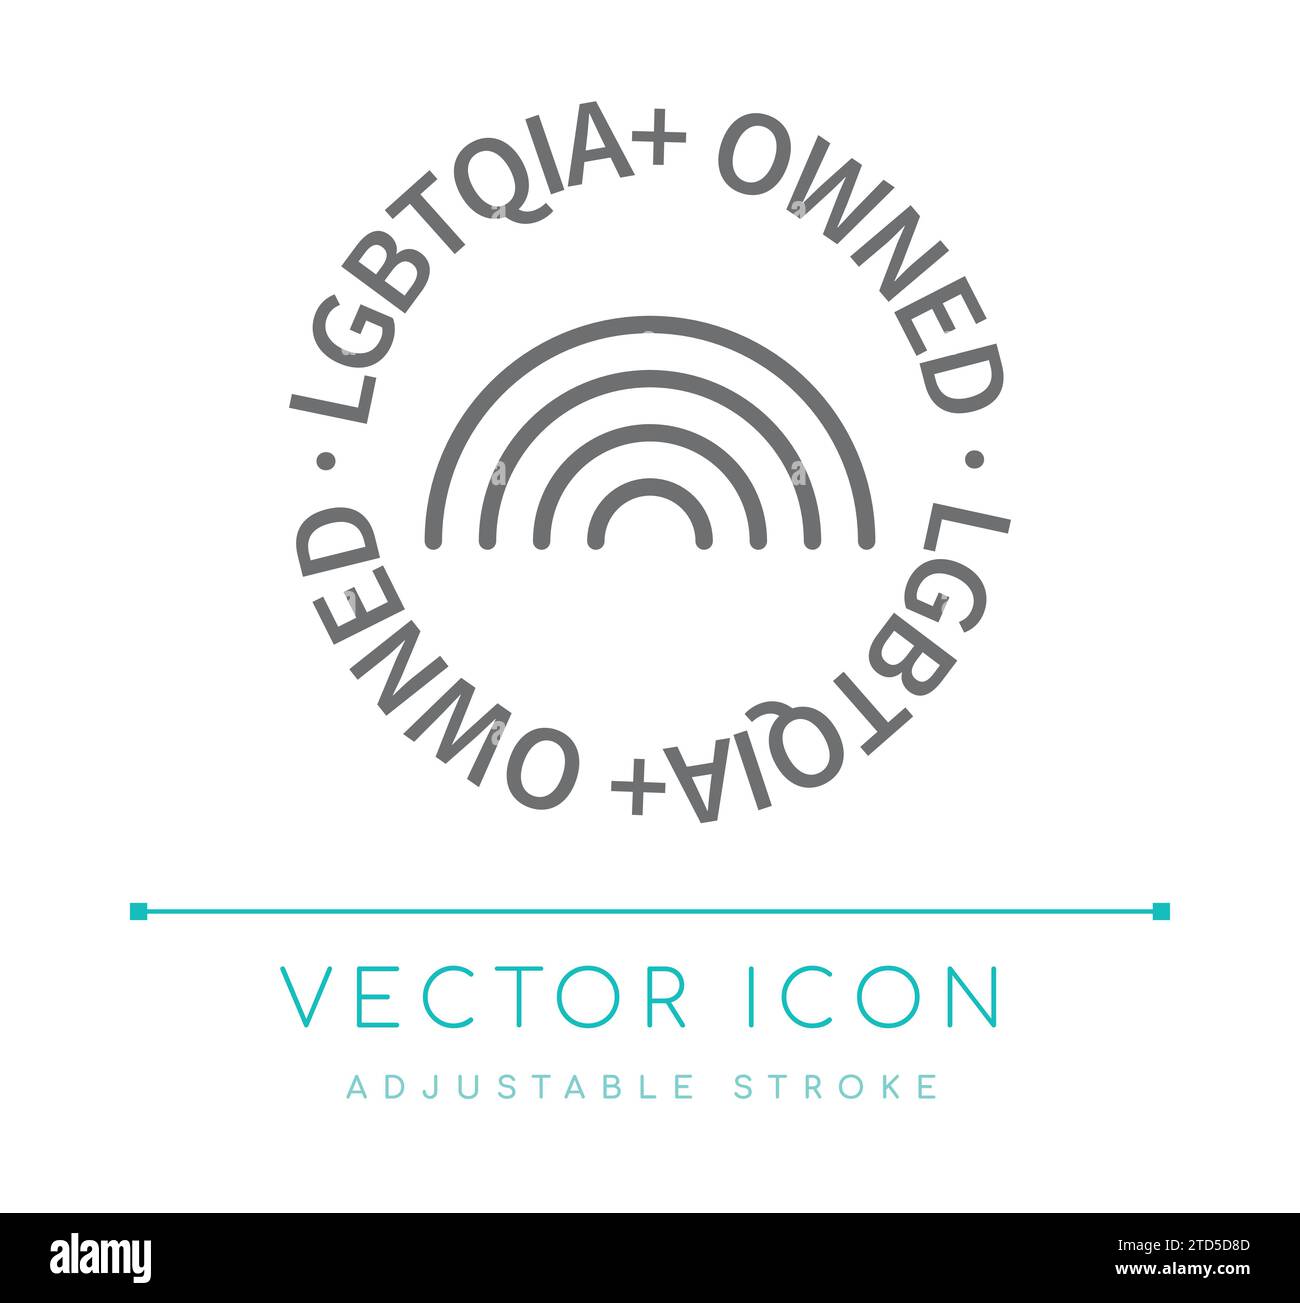 LGBTQIA+ Owned Business Vector Line Icon Stock Vector